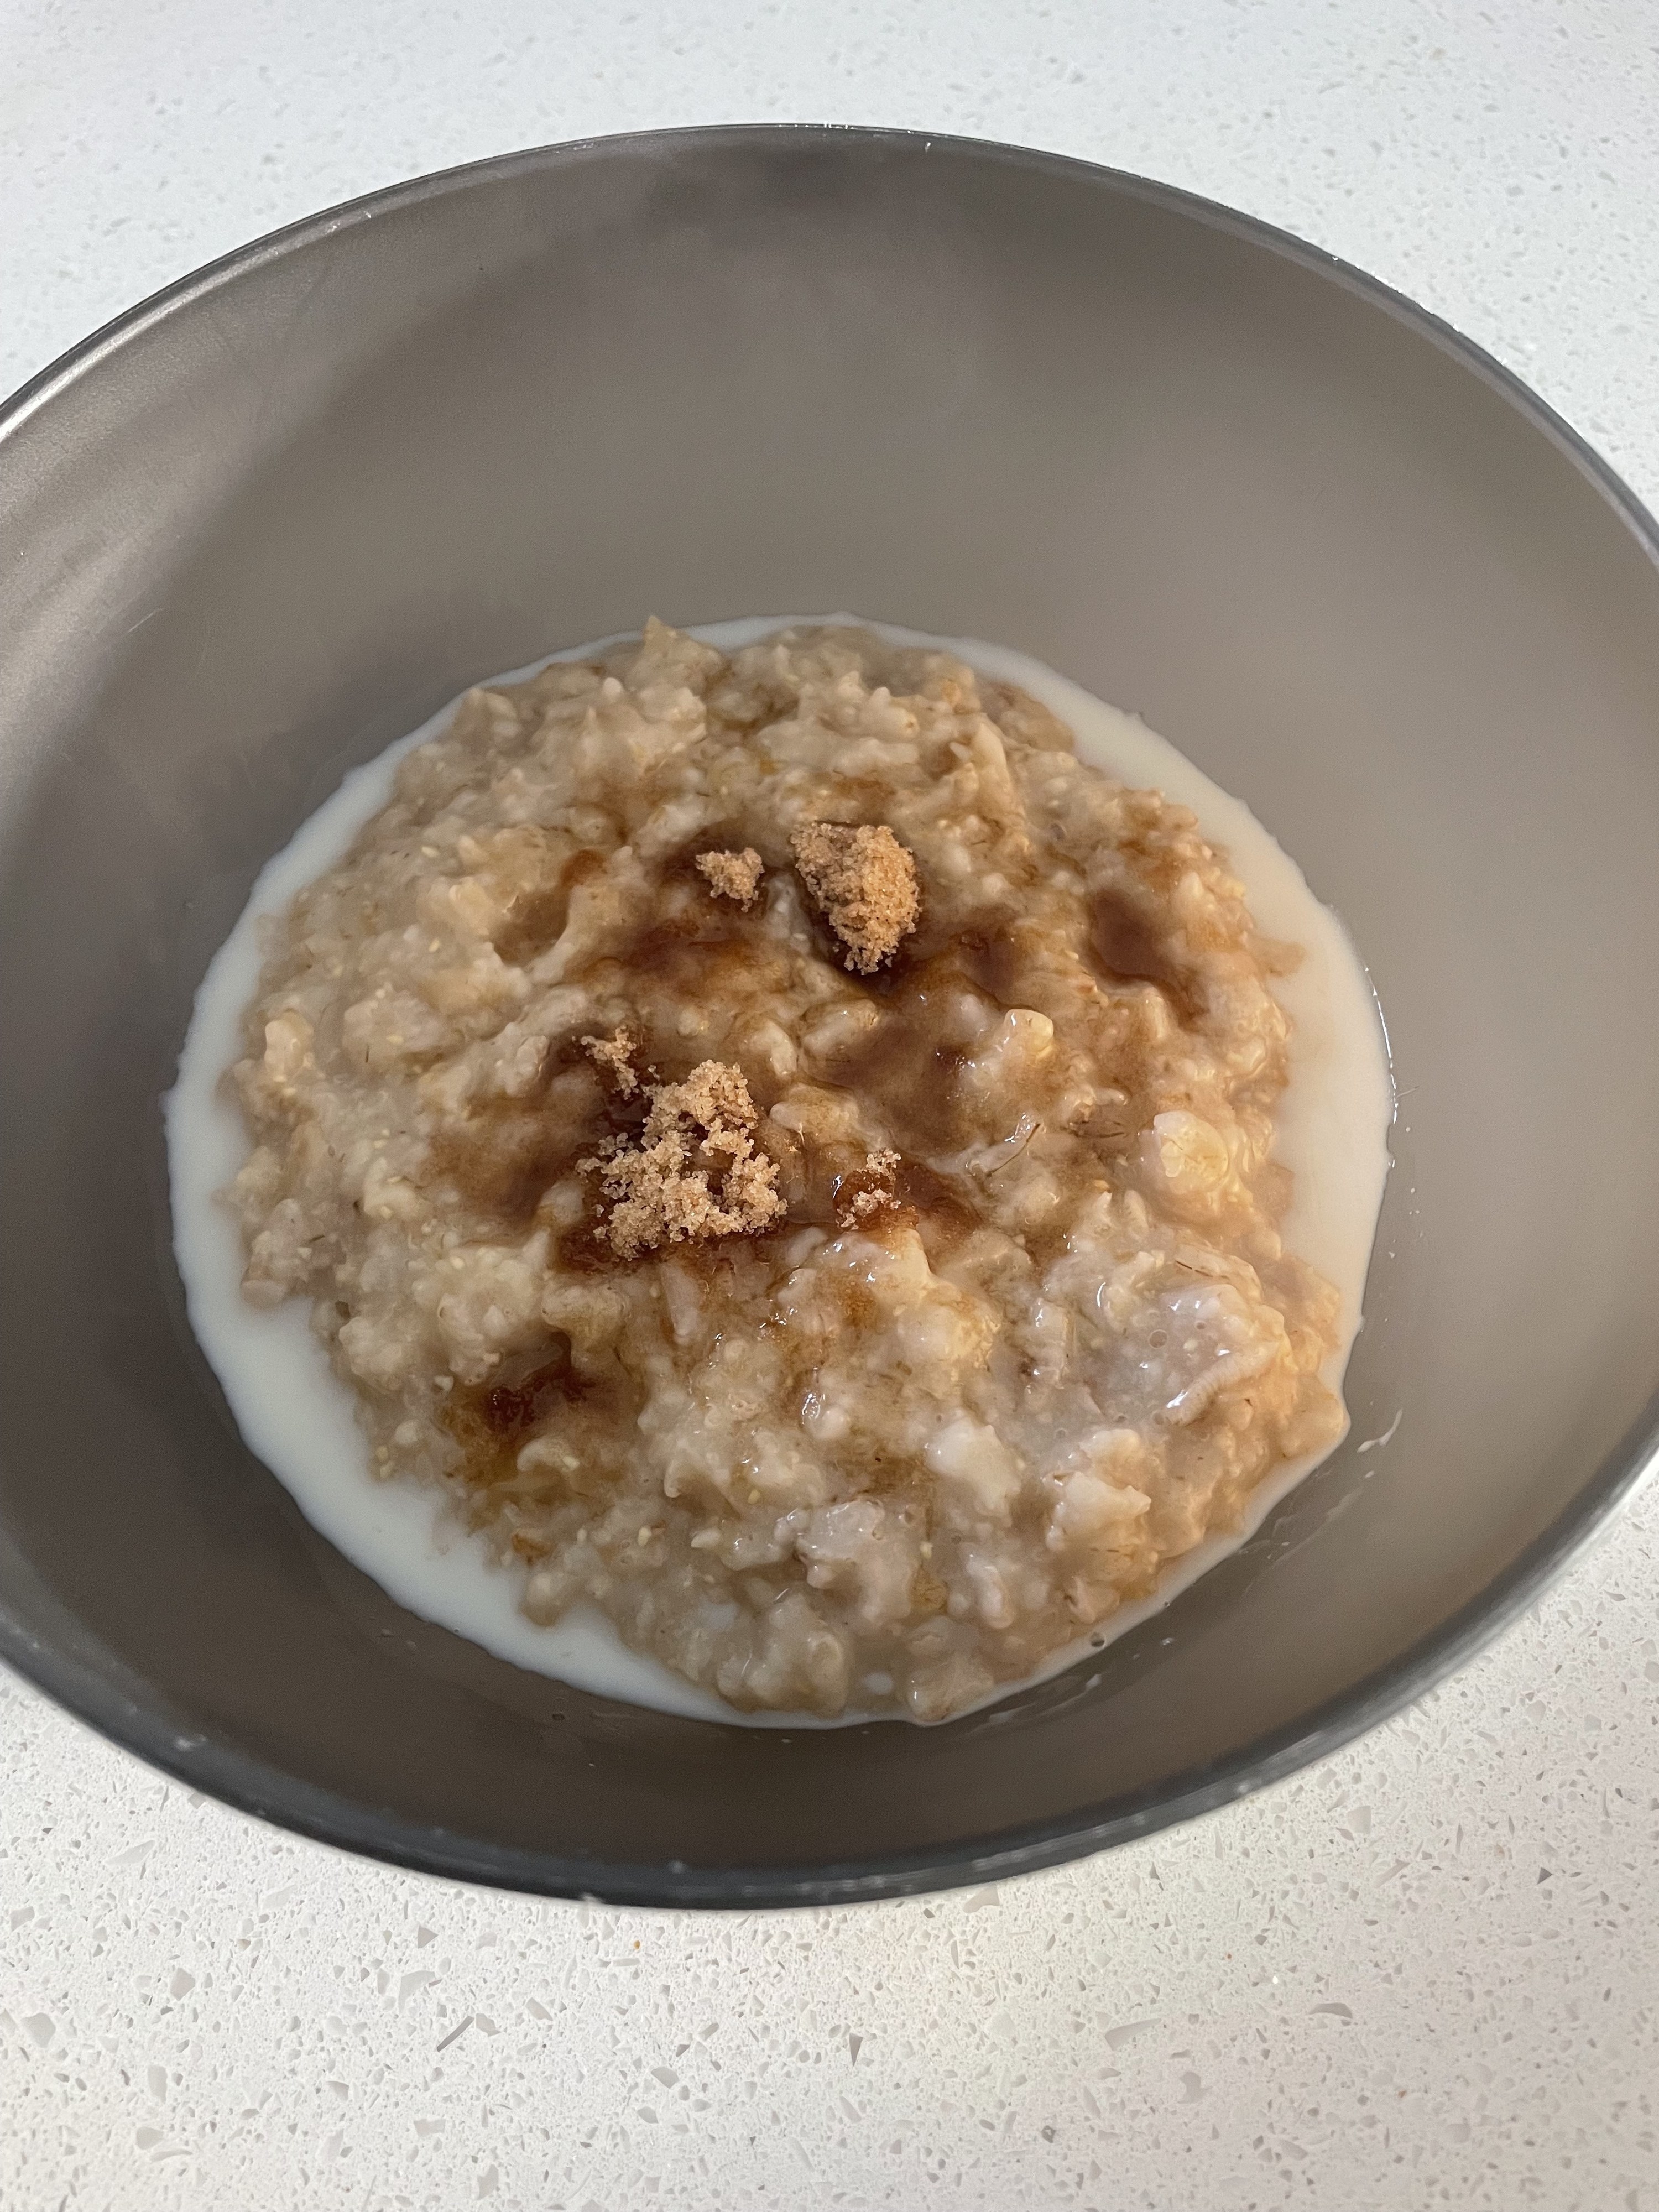 Oatmeal in a bowl